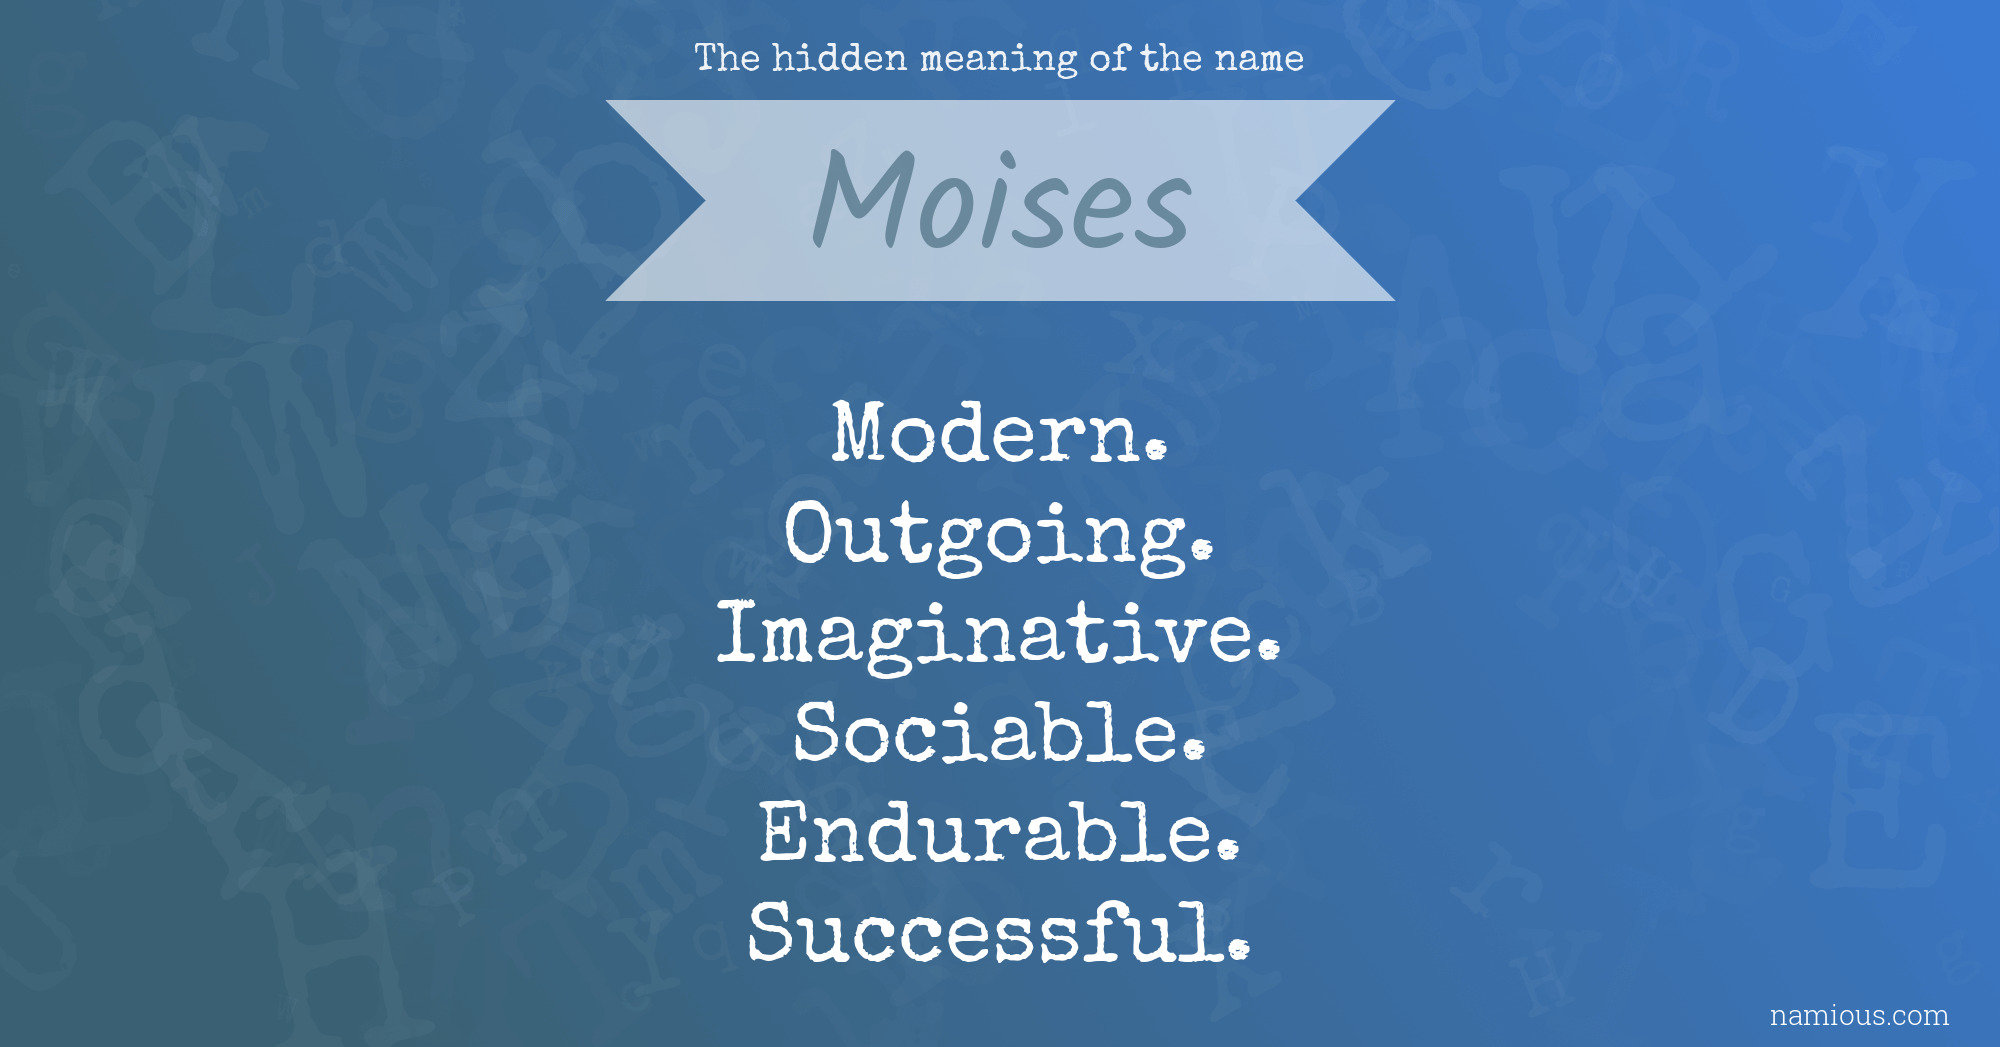 The hidden meaning of the name Moises